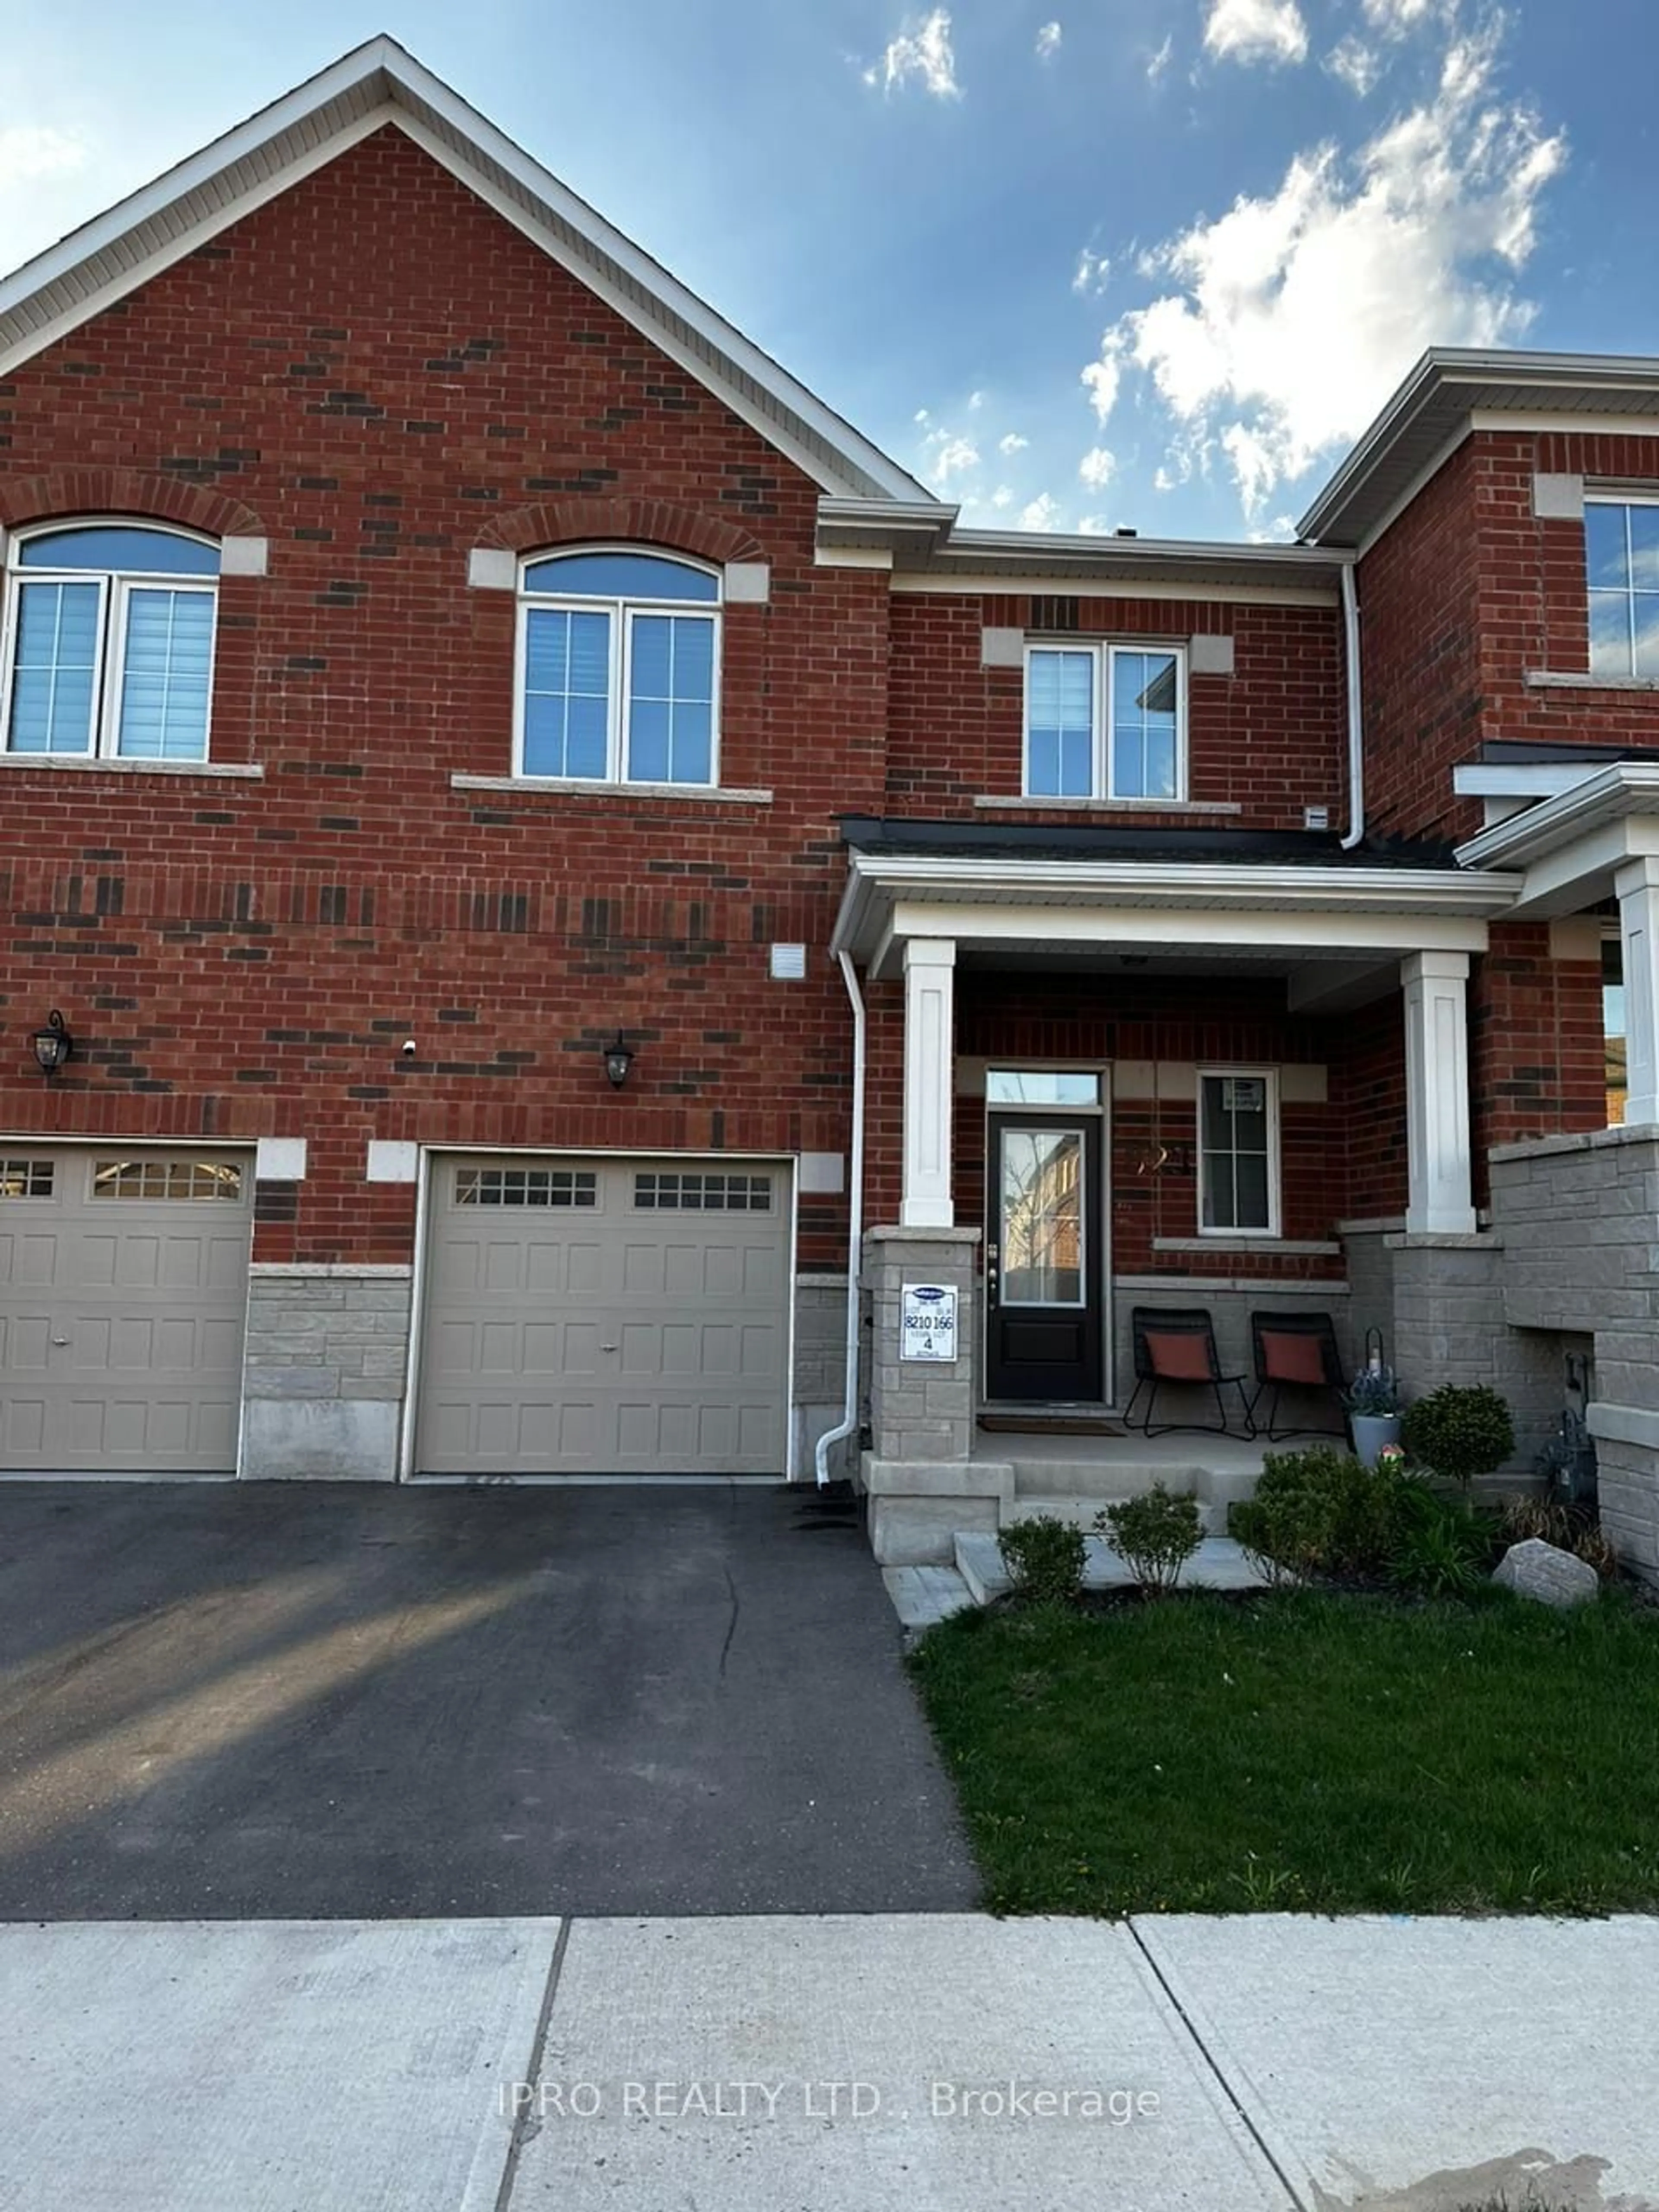 Home with brick exterior material for 823 Proud Dr, Milton Ontario L9E 1S2